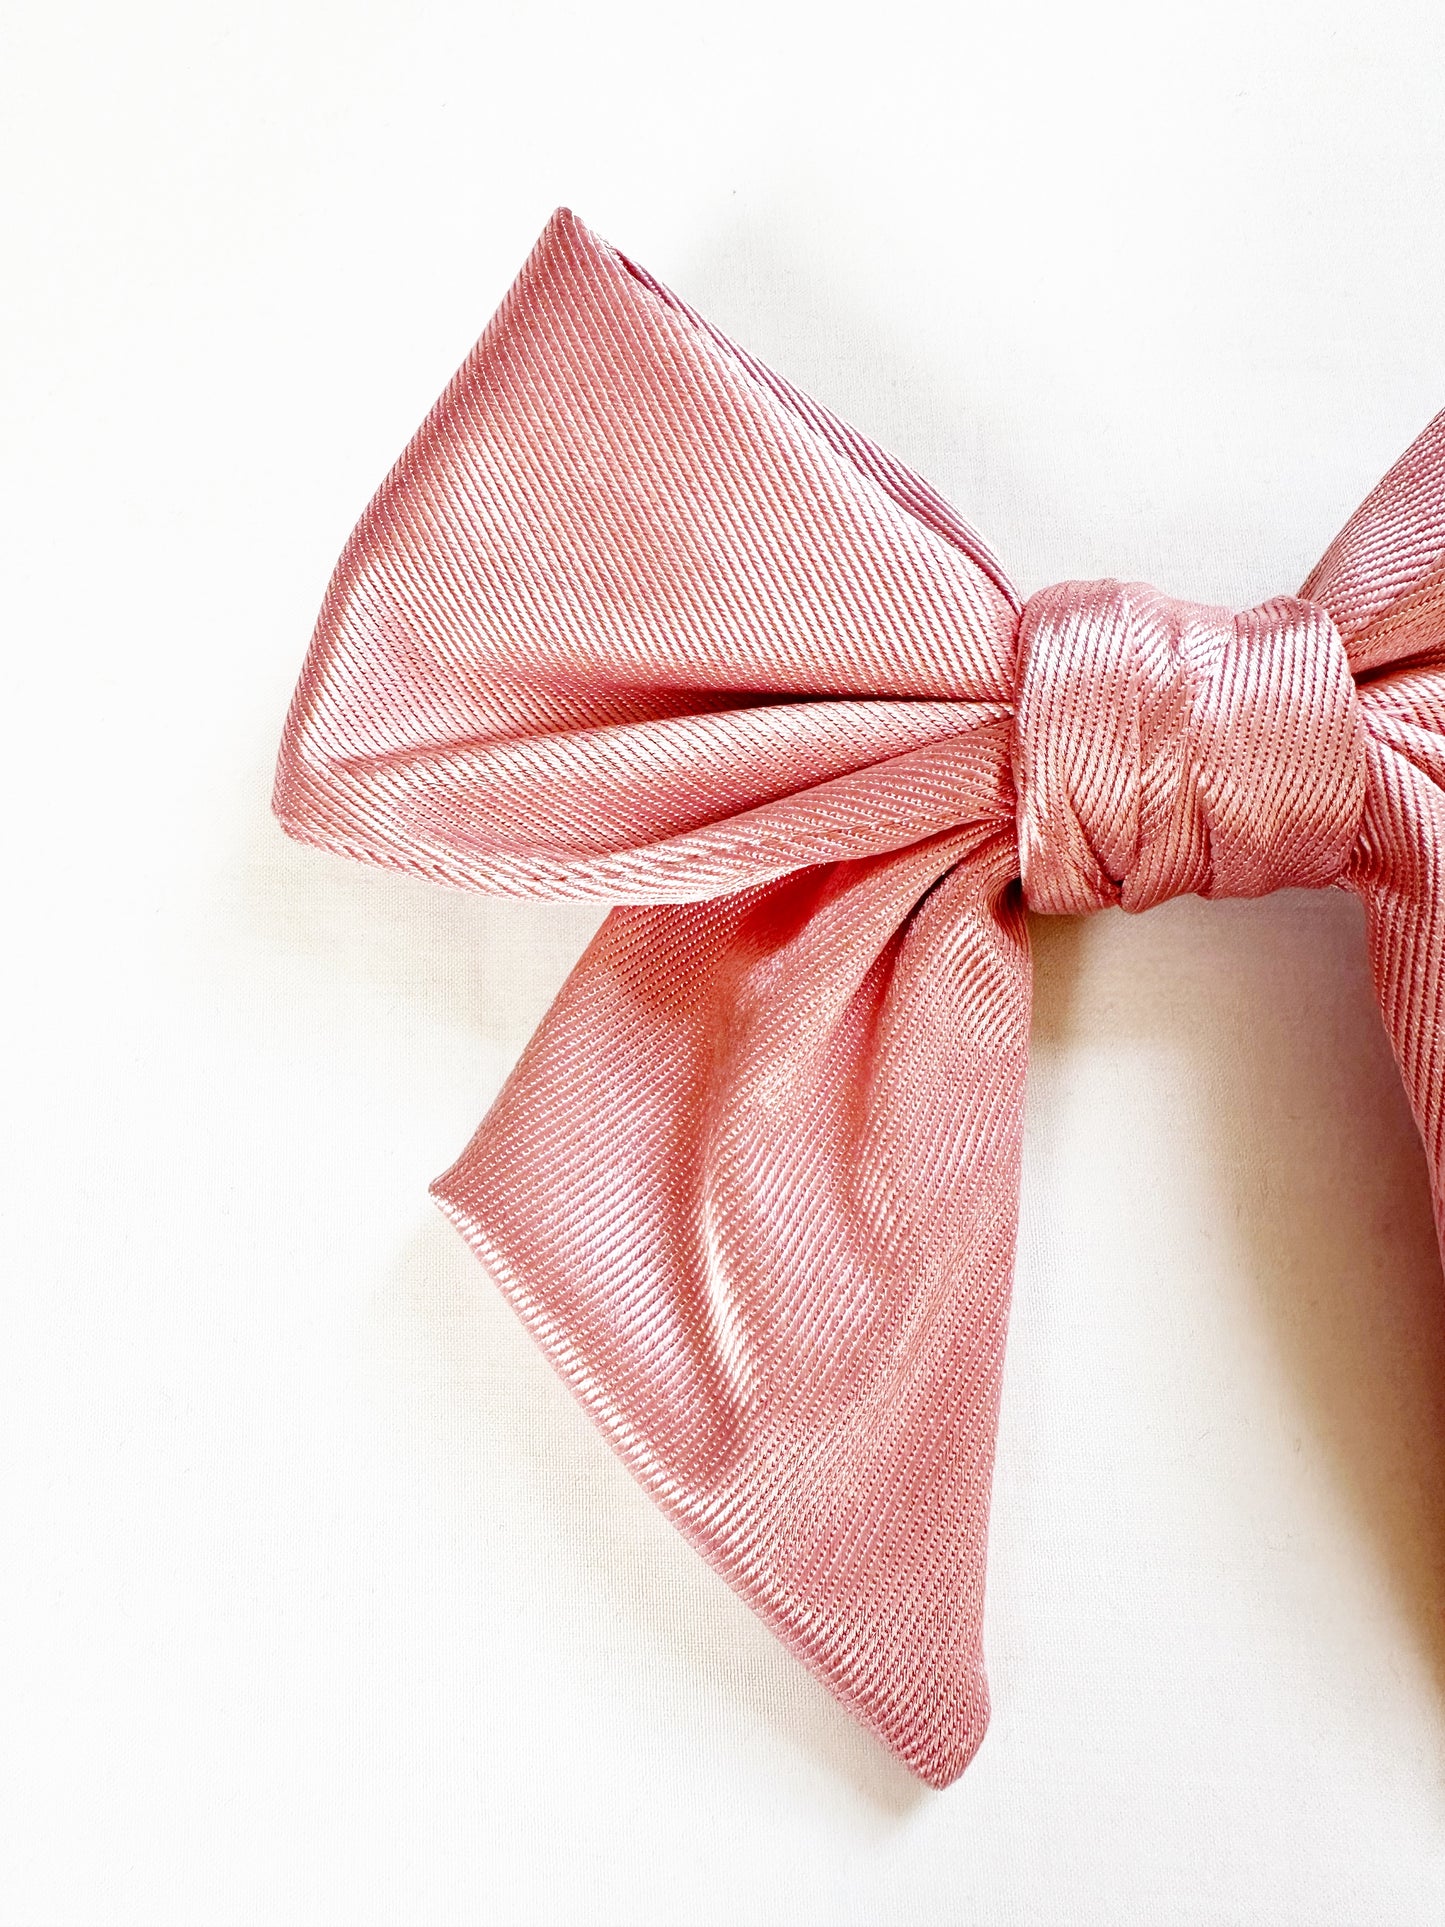 Hair Bow in pink shimmer